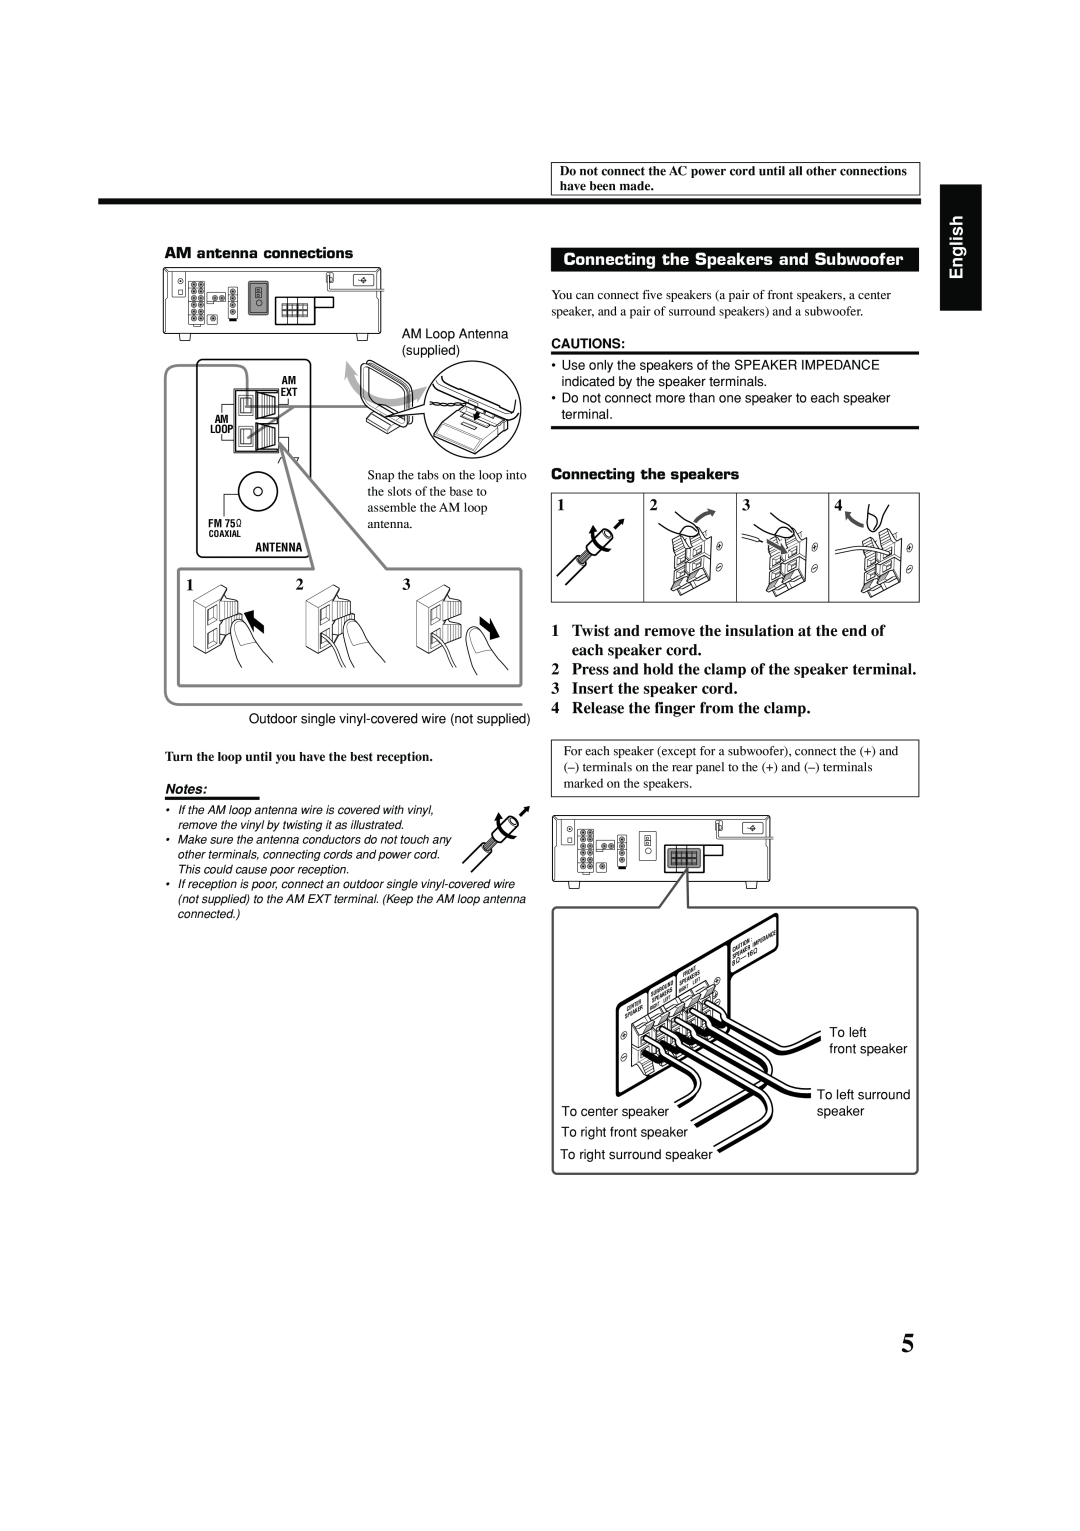 JVC LVT1290-007A manual Connecting the Speakers and Subwoofer, 2Press and hold the clamp of the speaker terminal, English 